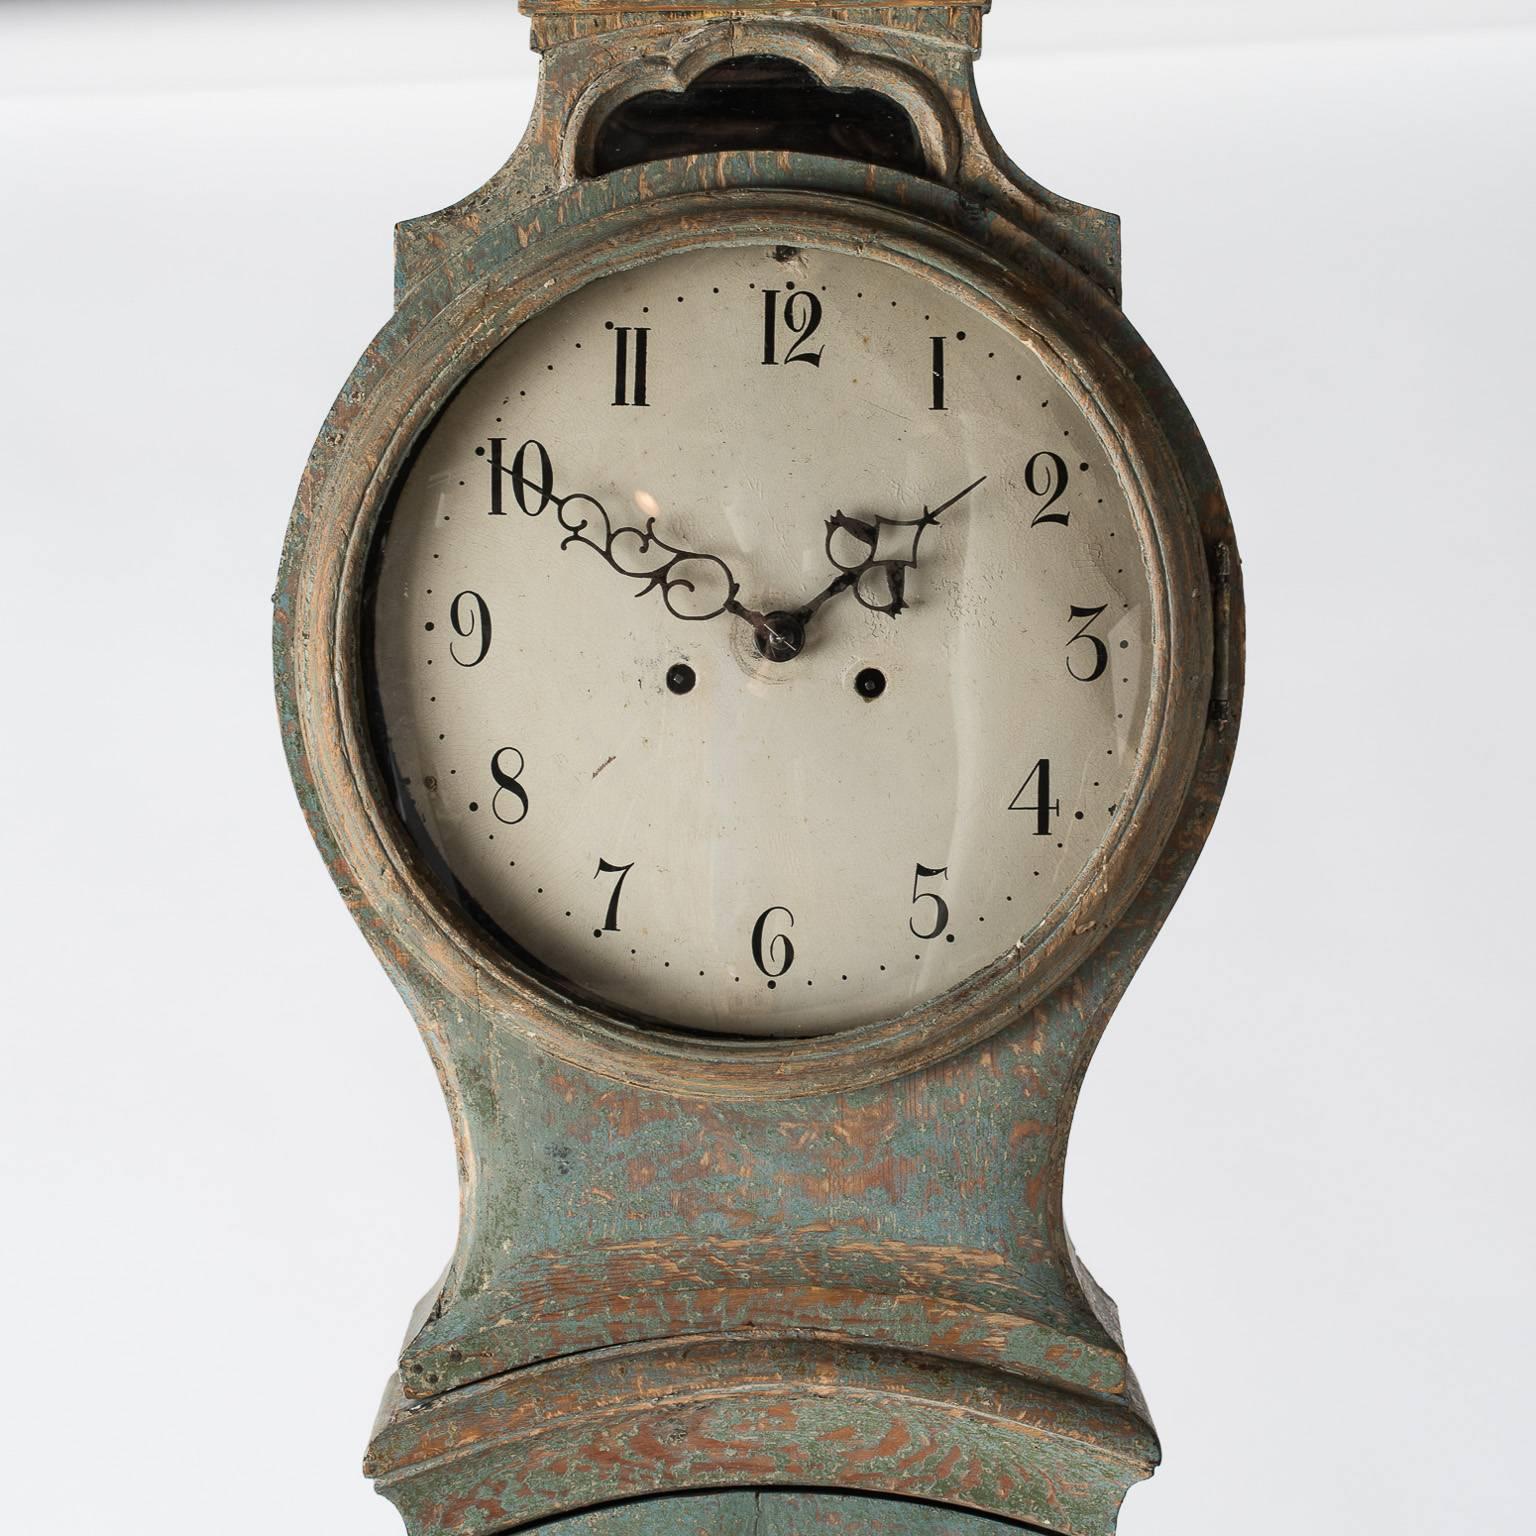 This Mora clock has many beautiful details making it an excellent example of the period. The bonnet features windows on the sides that allow one to see the clock works. The blue original paint surface is in lovely condition.

Measures: 8”